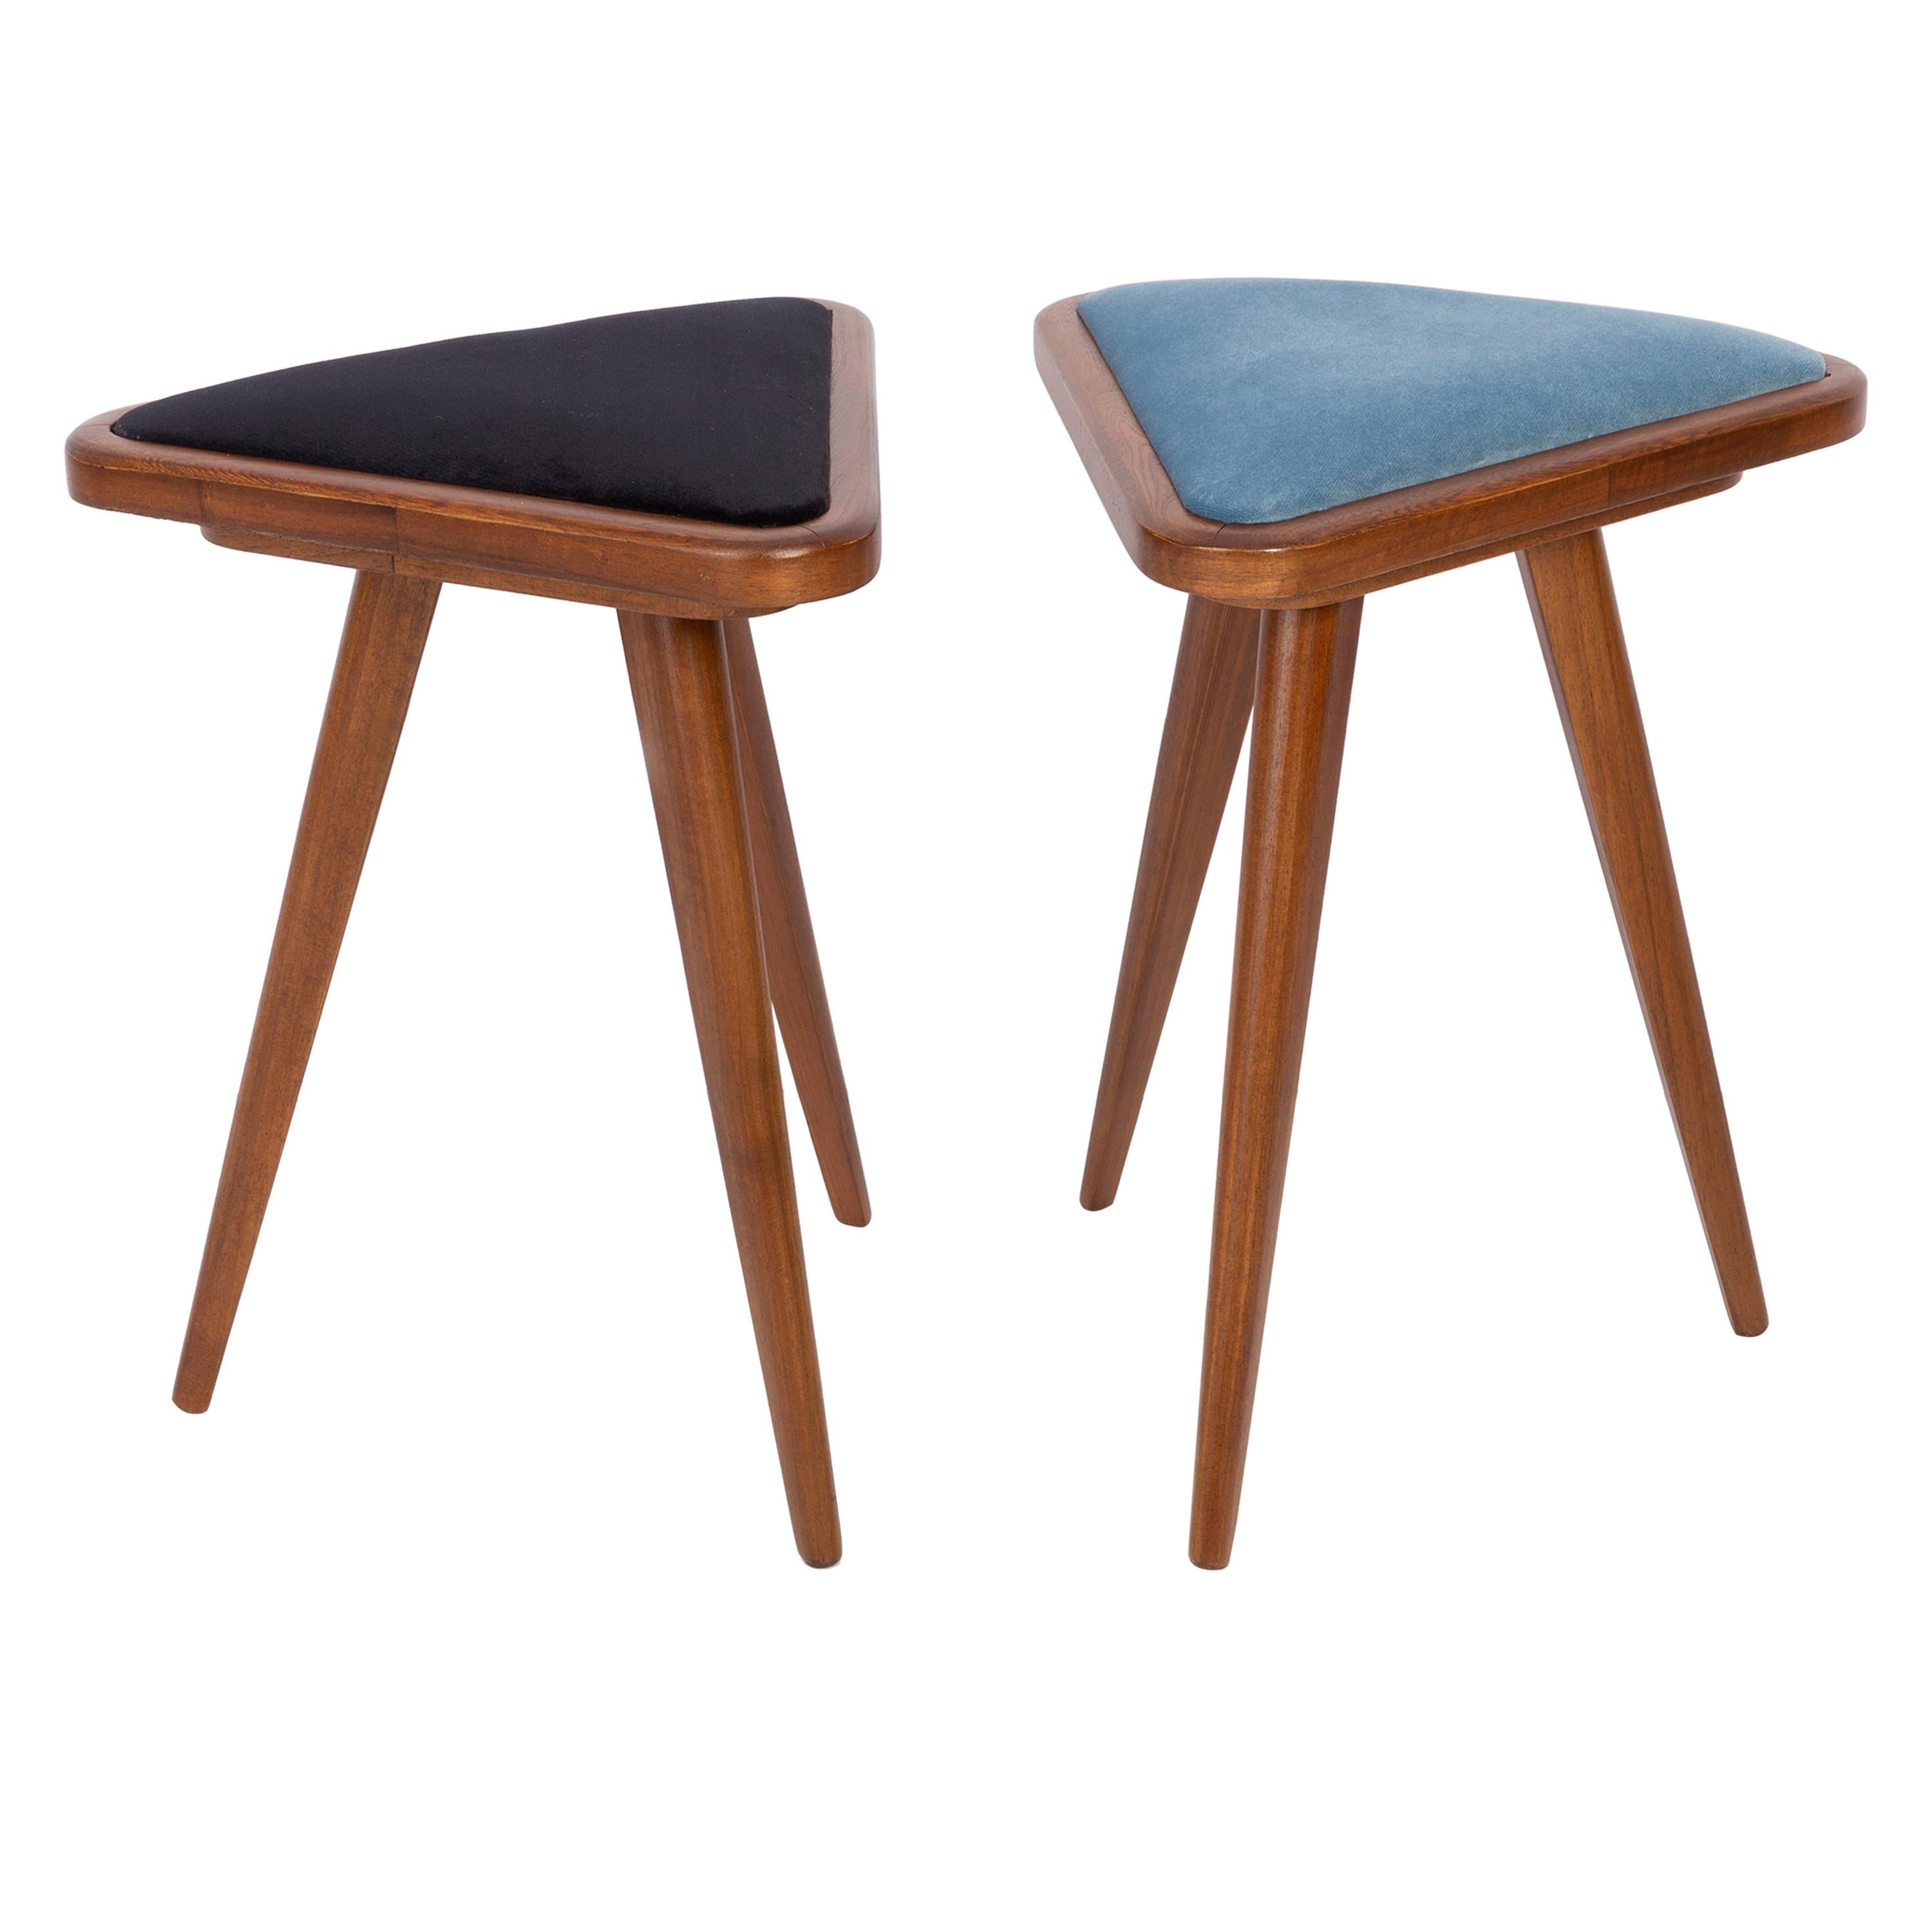 Set of Two Black and Blue Velvet 20th Century Stools, 1960s